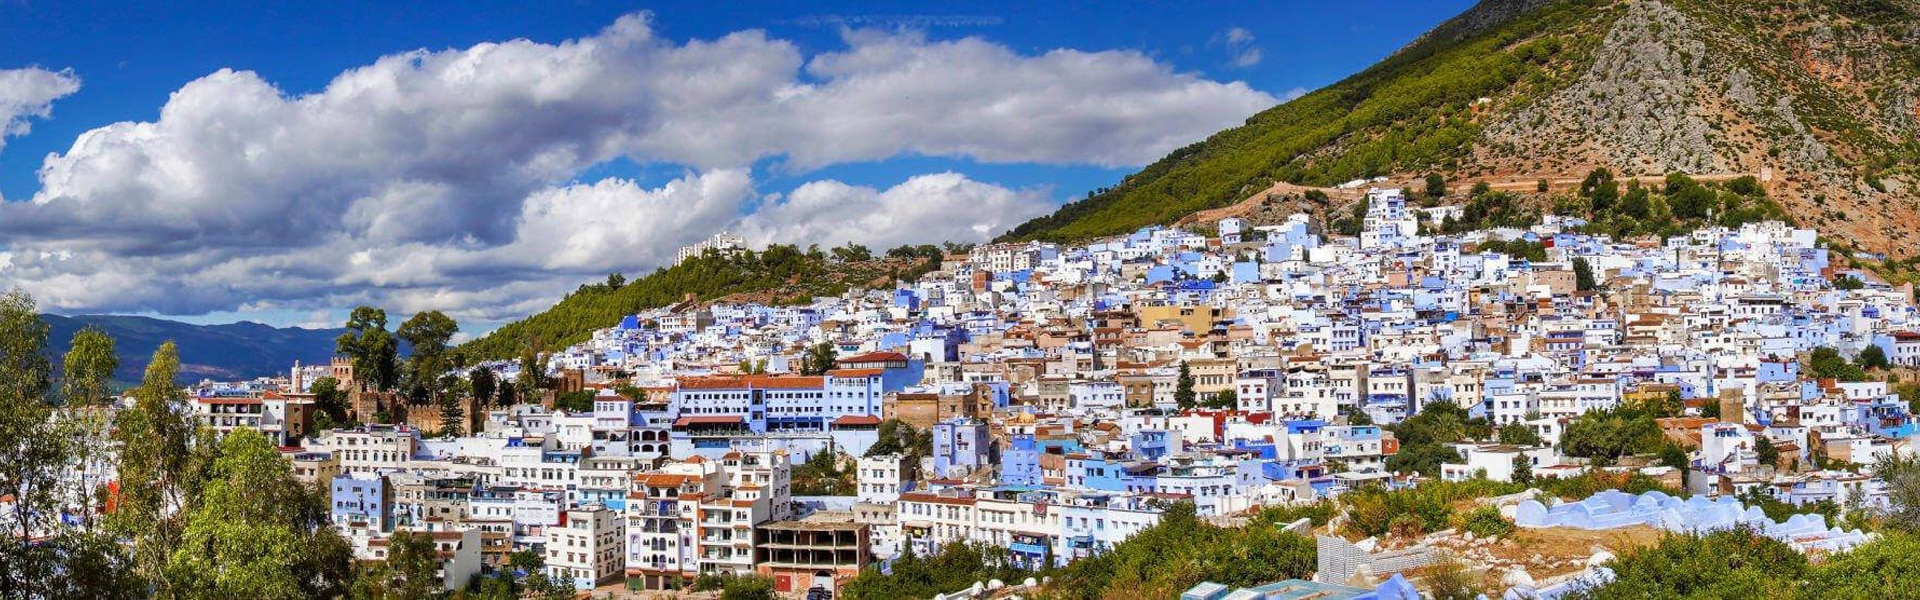 Why You Should Visit the Blue City Chefchaouen